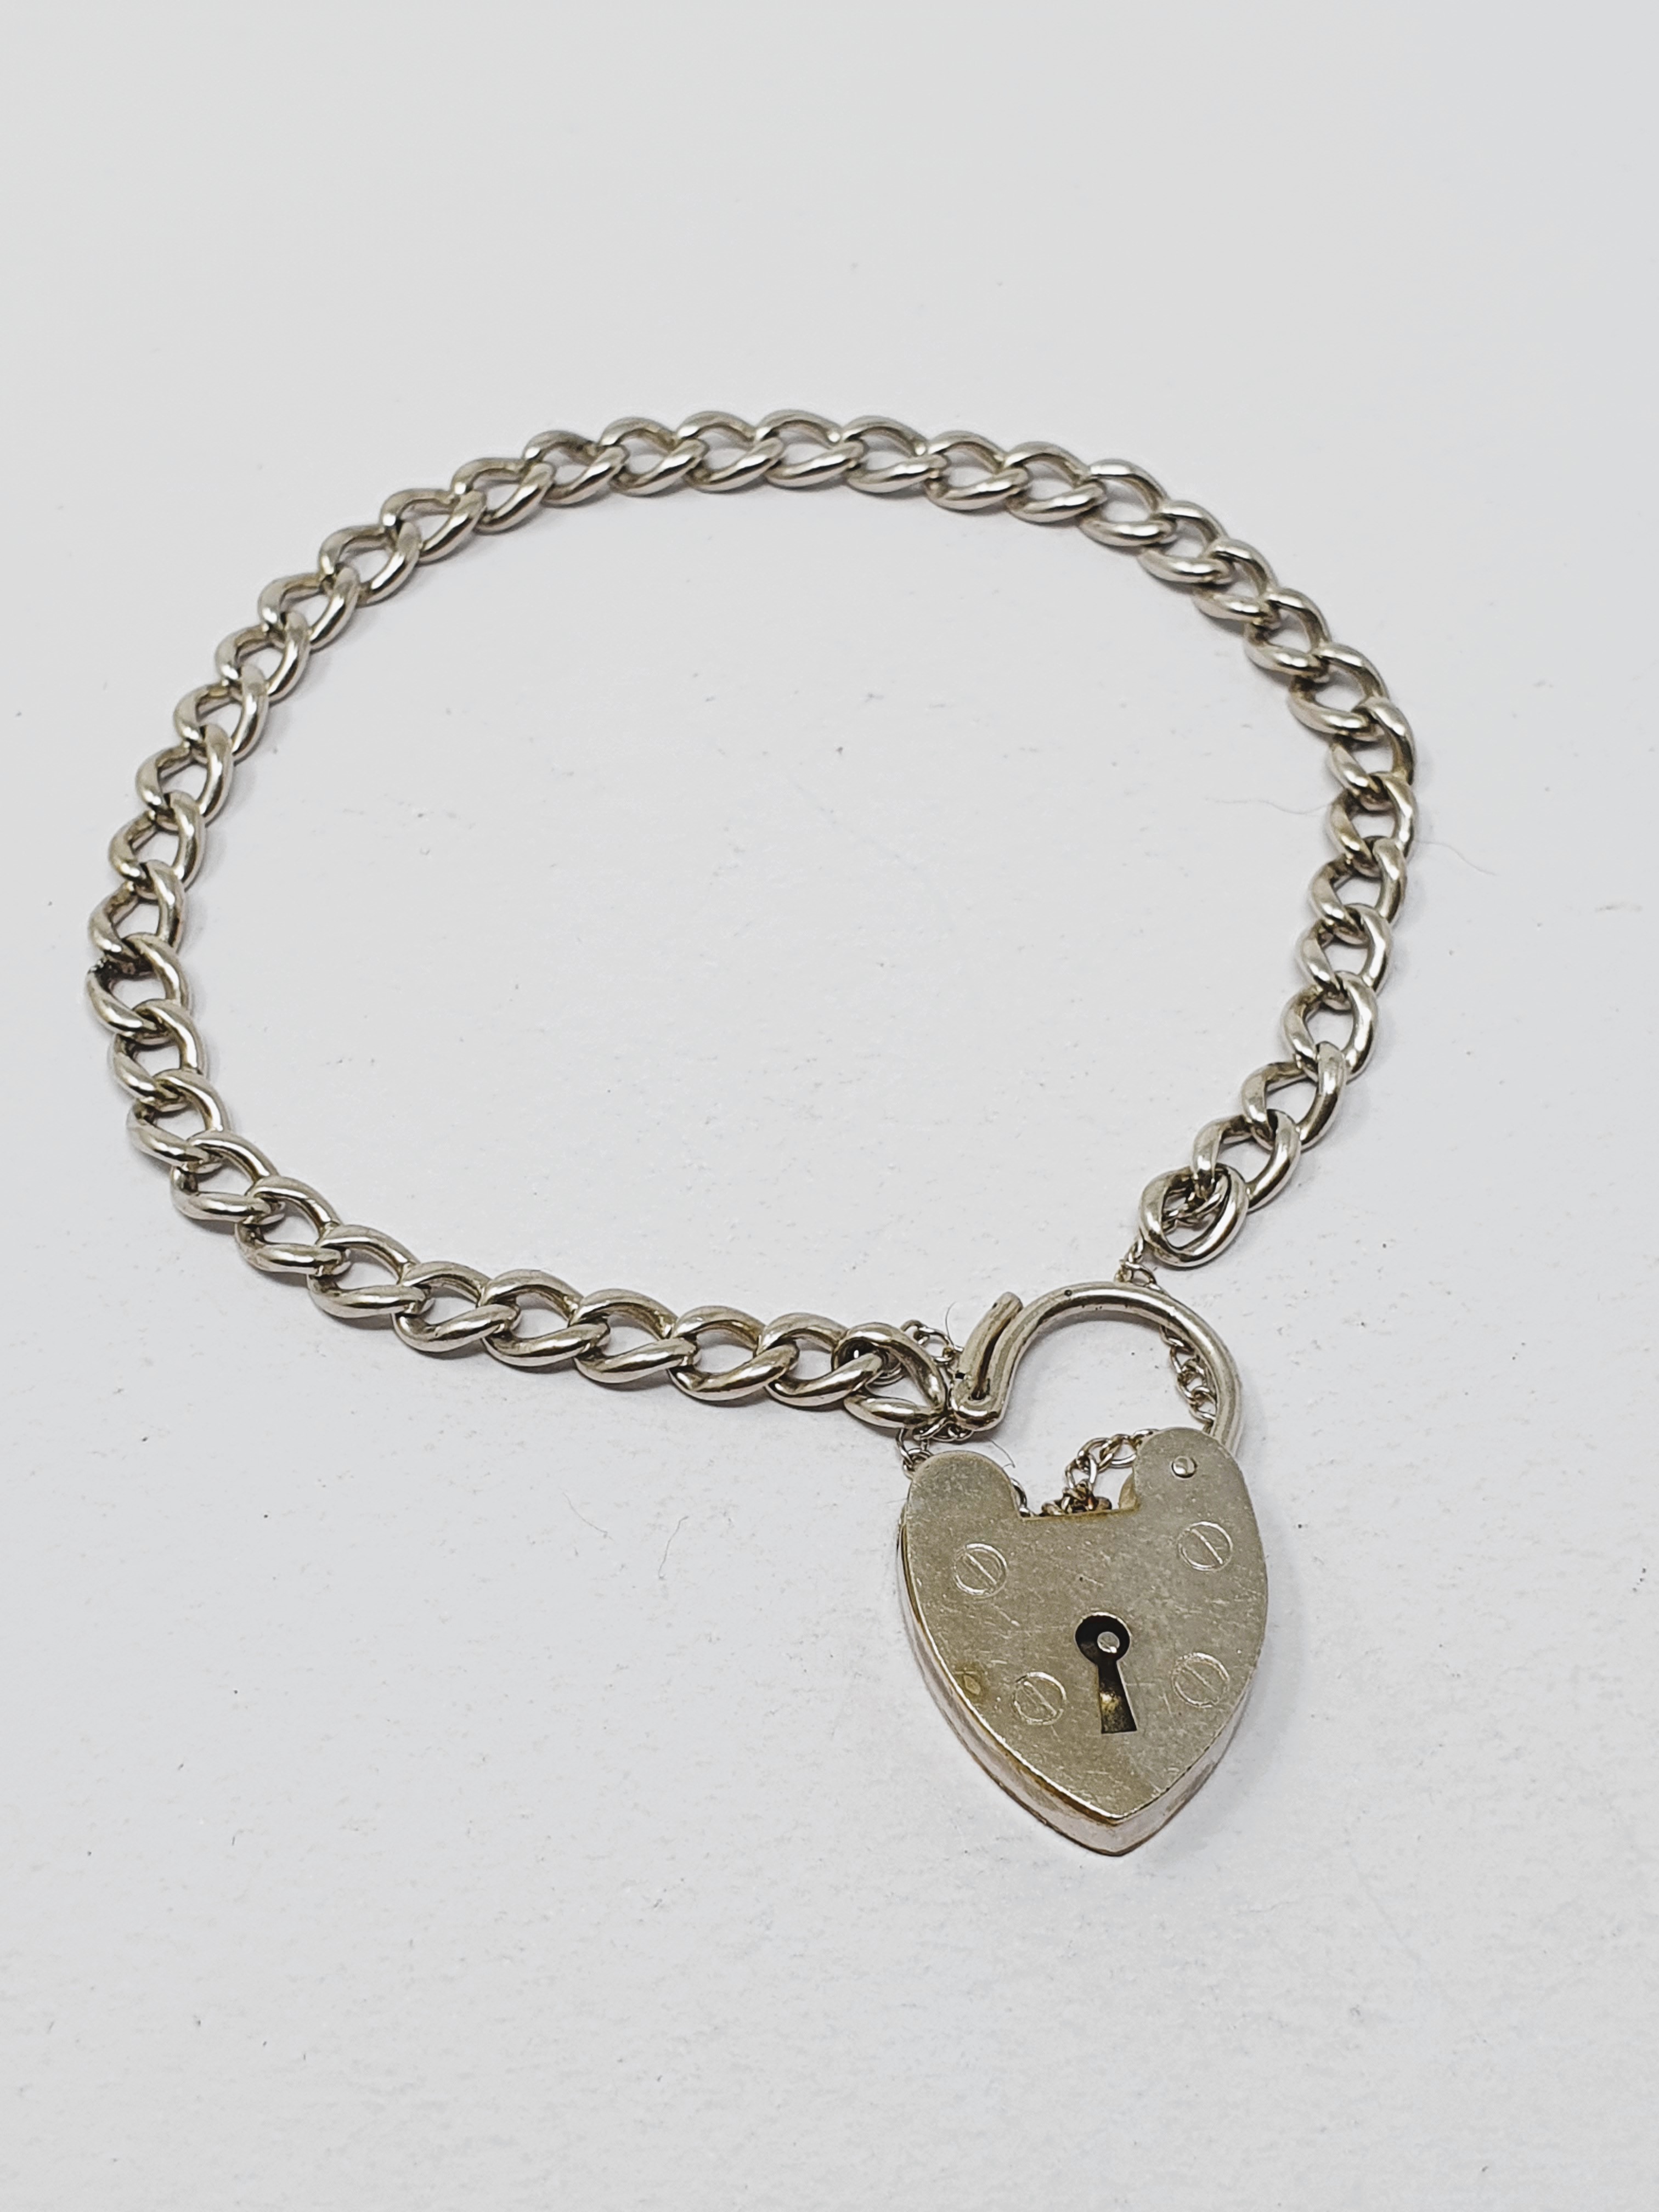 Sterling silver vintage charm bracelet, graduated curb links, padlock fastener and safety chain, - Image 2 of 3